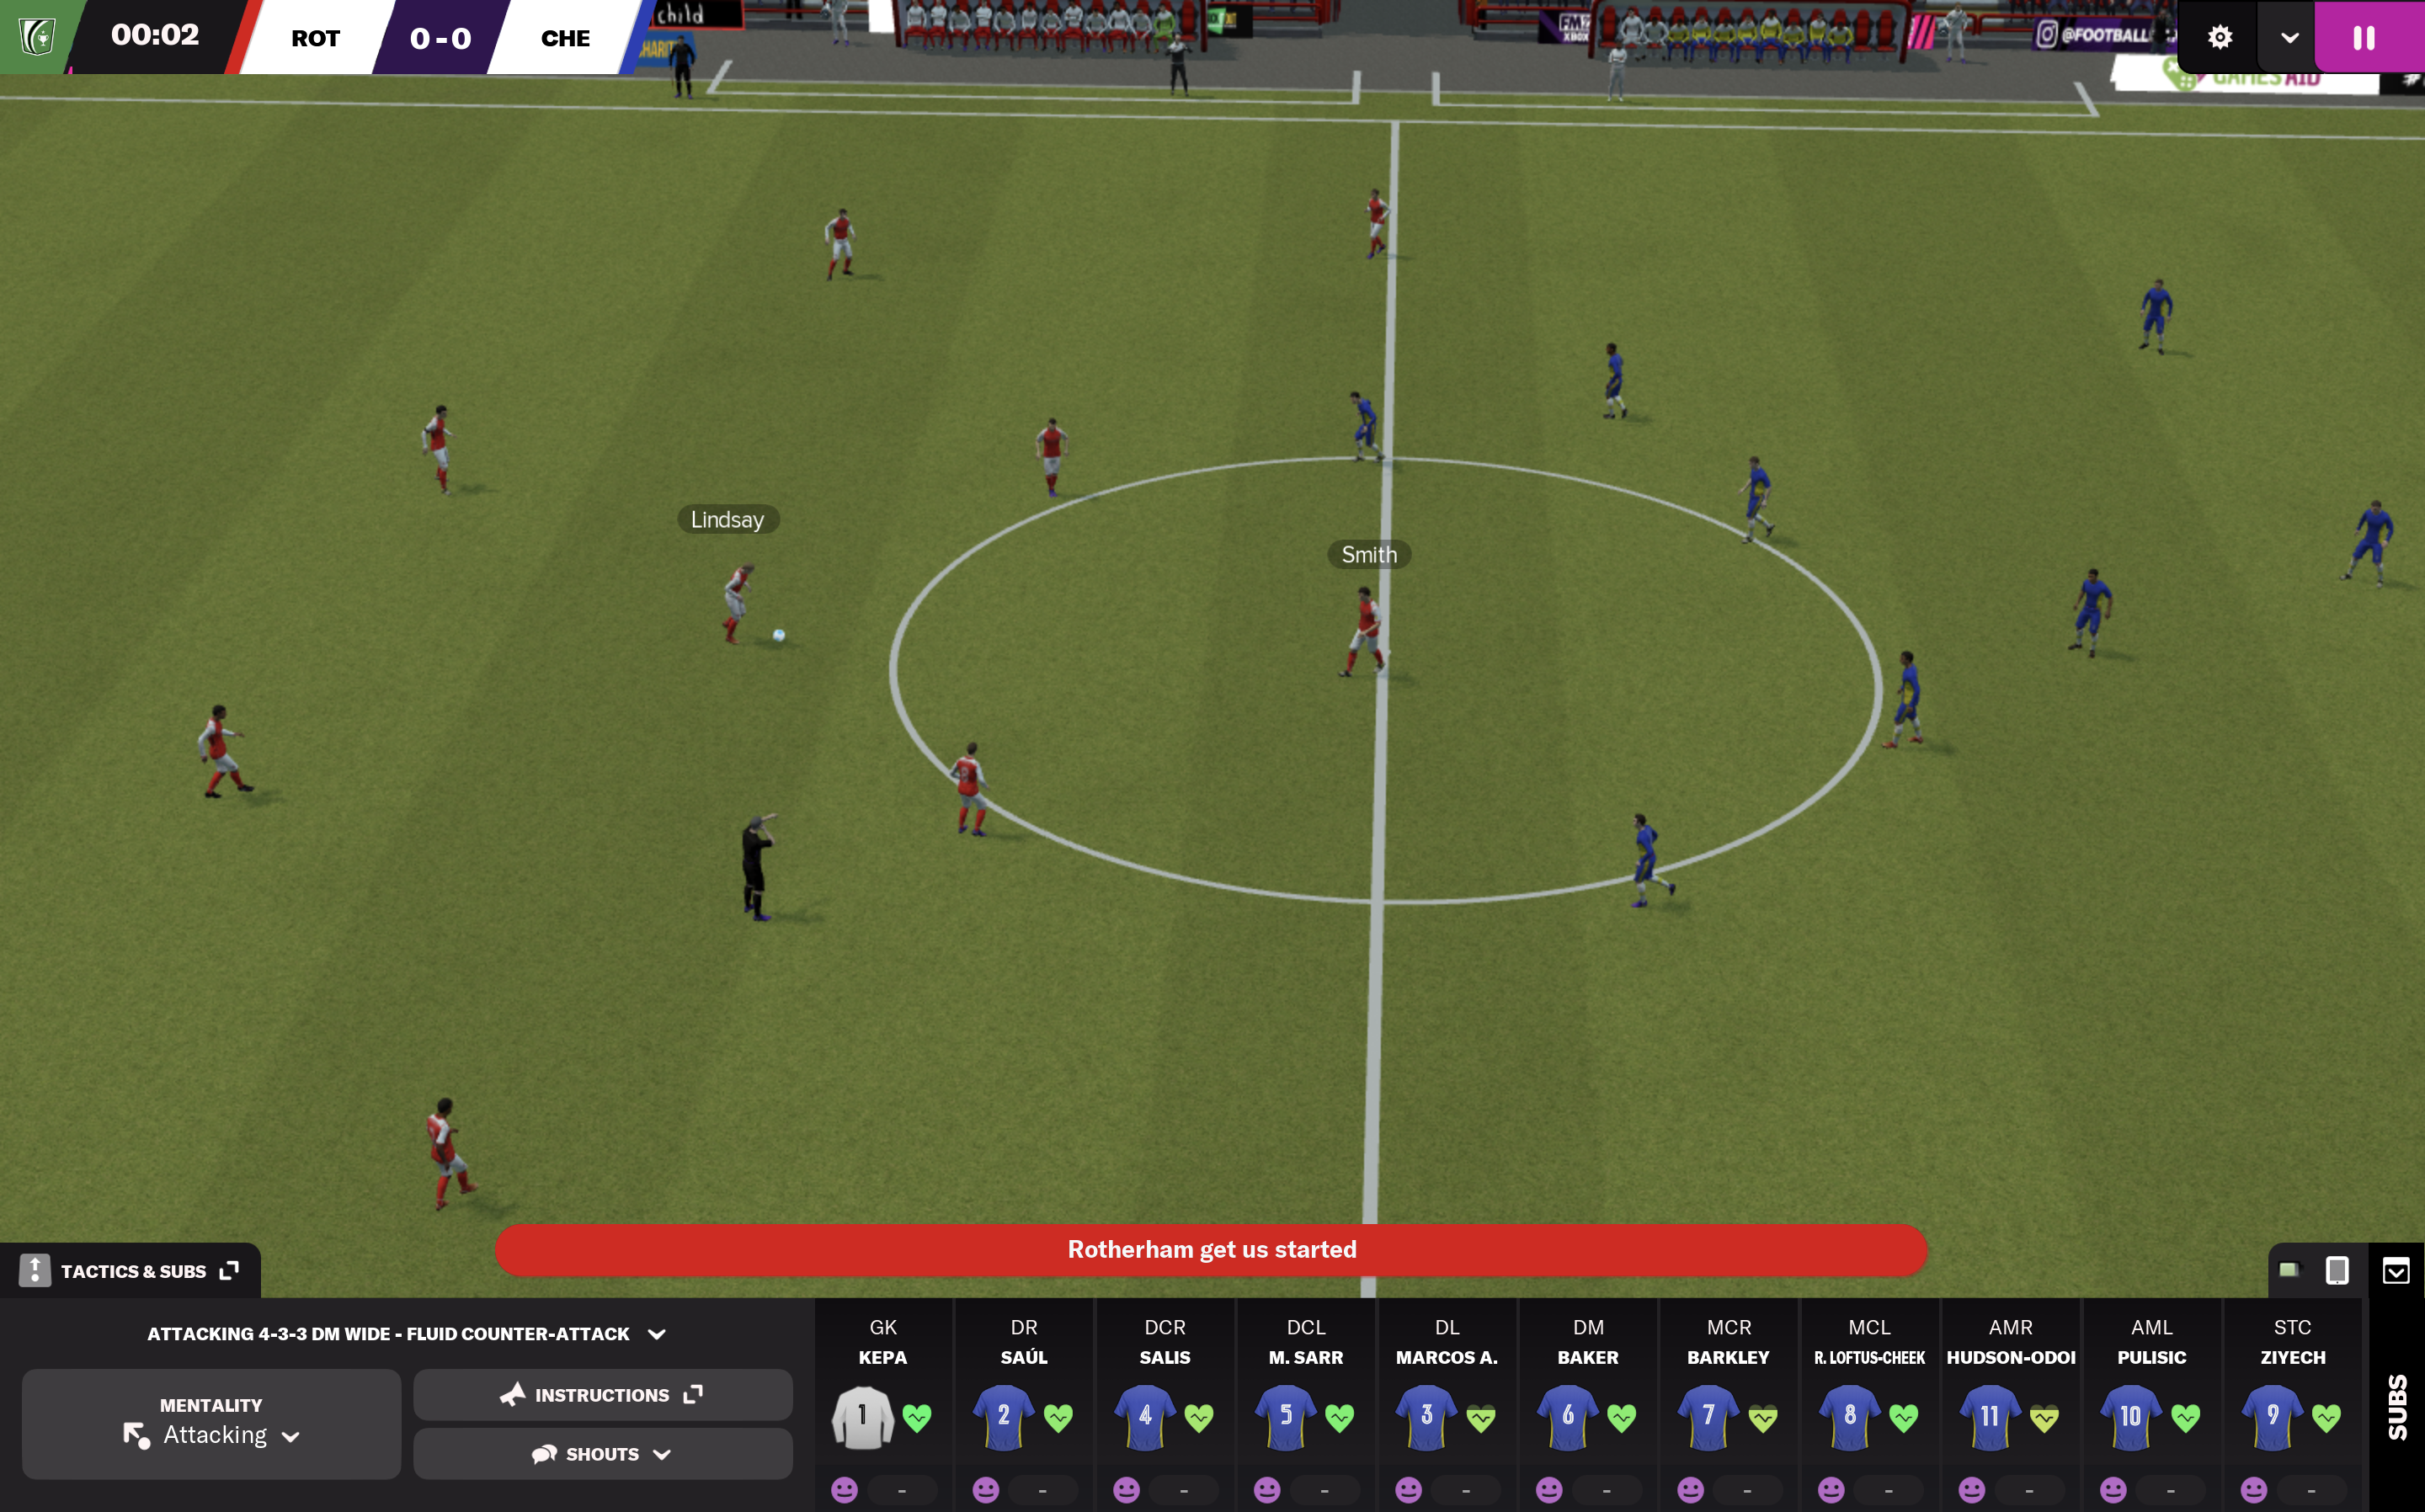 Try Football Manager 2022 Free on Steam Until April 11 - Operation Sports